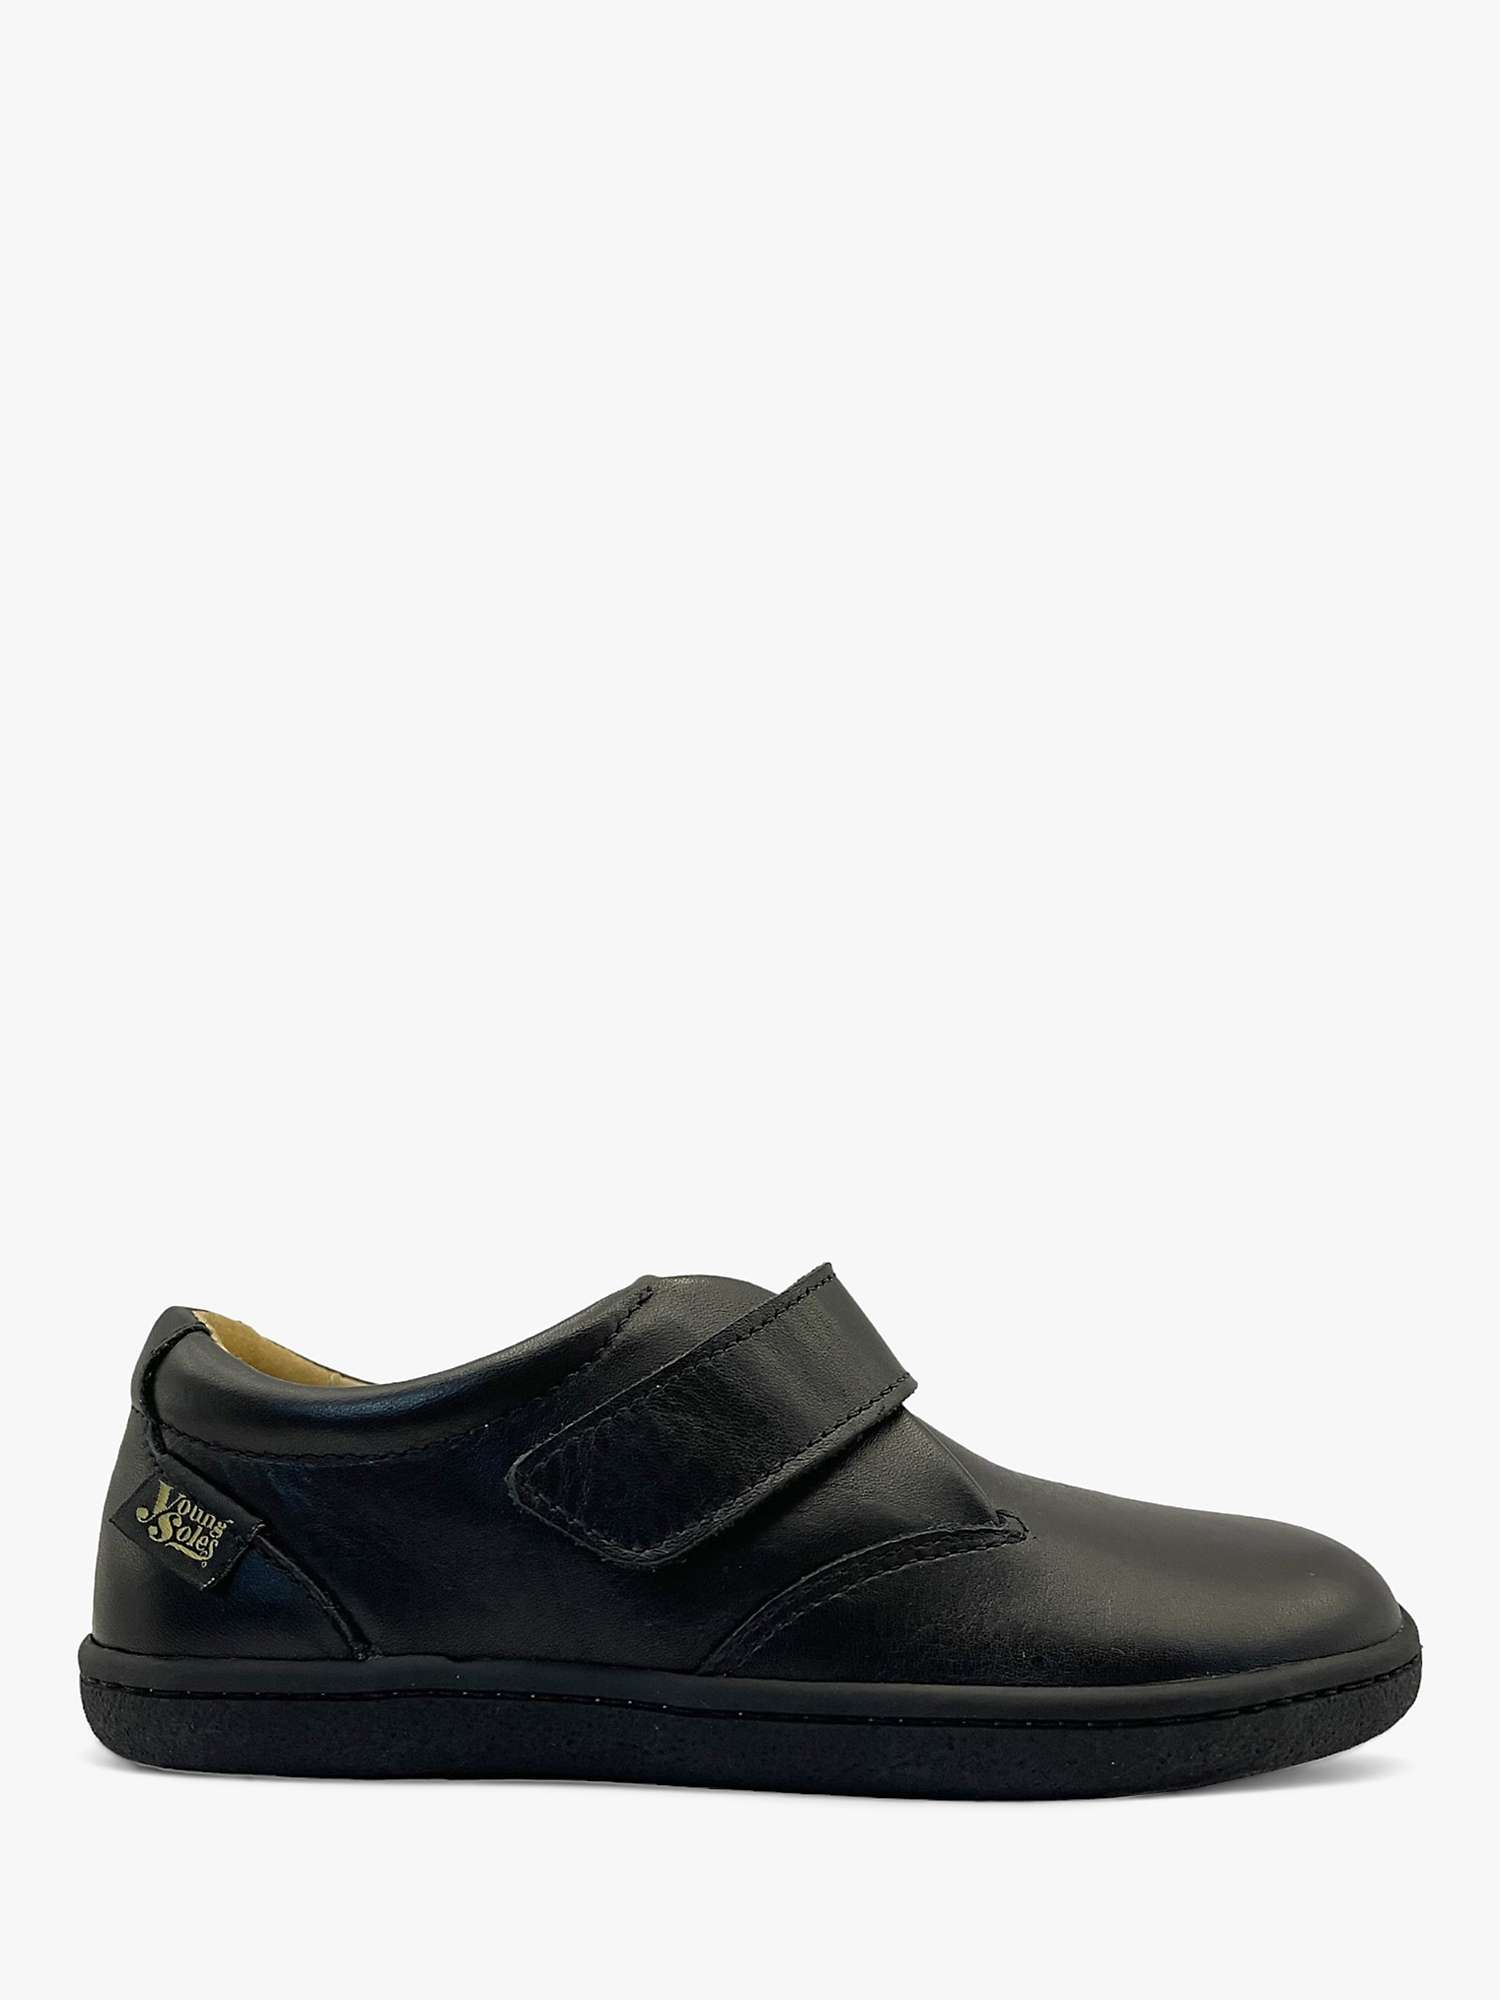 Buy Young Soles Kids' Leather Oliver Shoes, Black Online at johnlewis.com